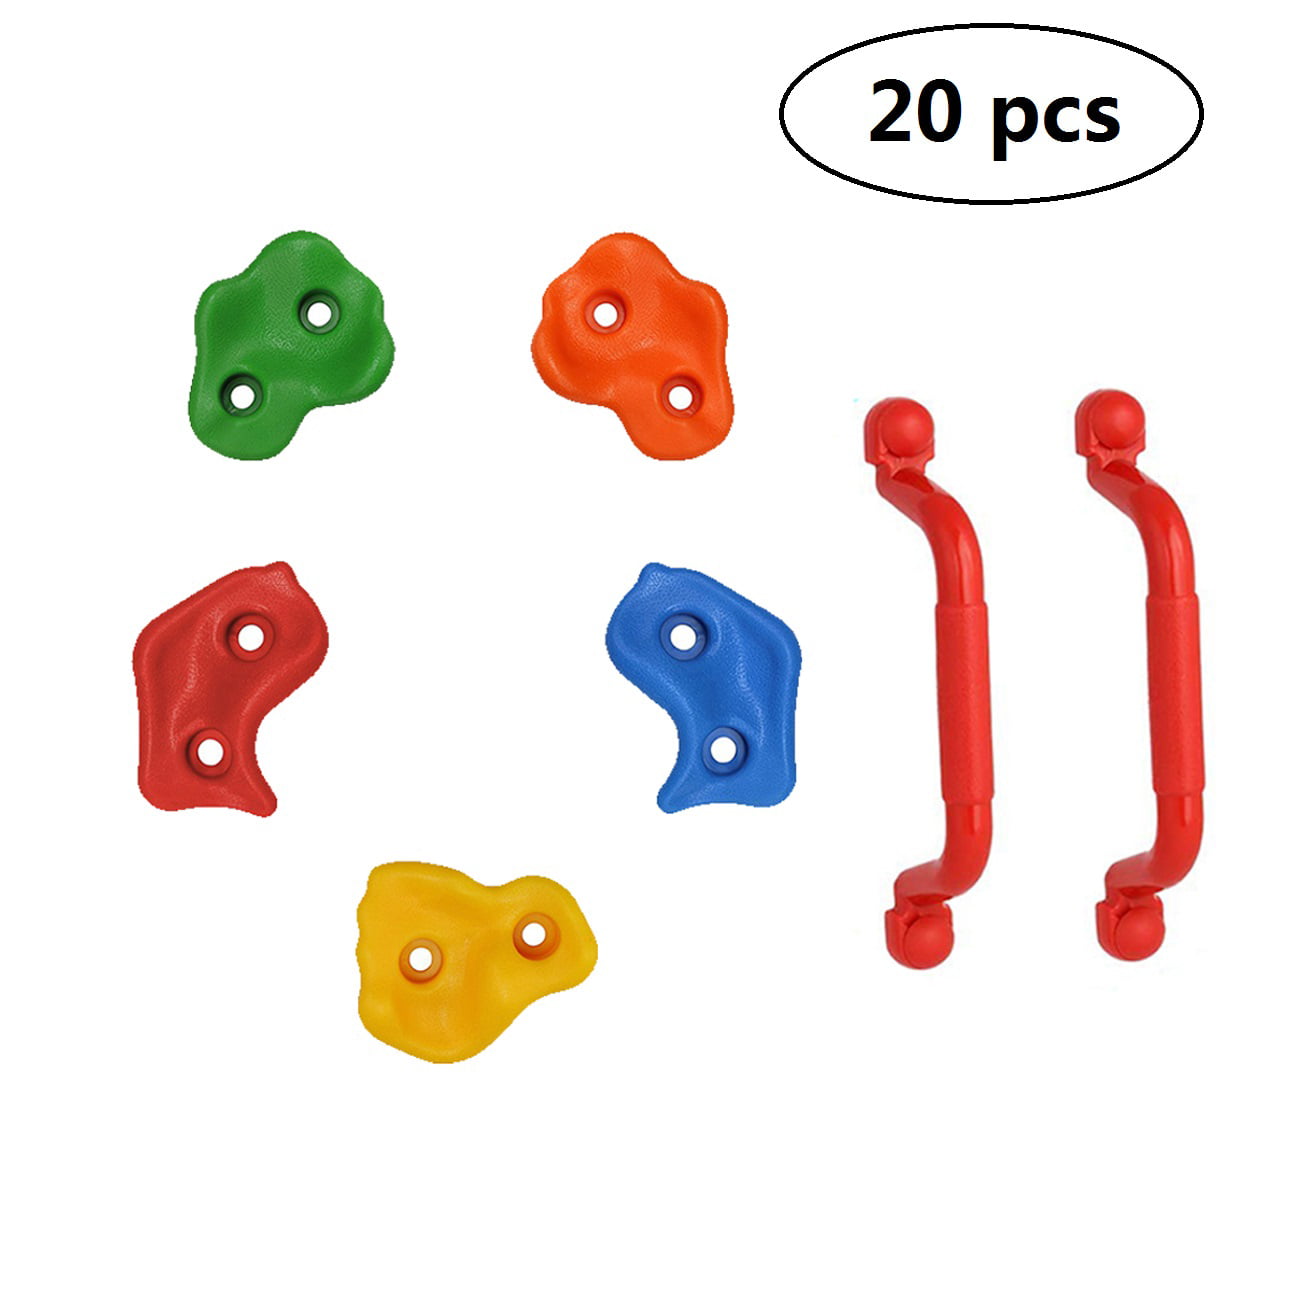 Made in the U.S.A 15 LARGE KIDS SCREW ON ROCK CLIMBING HOLDS 